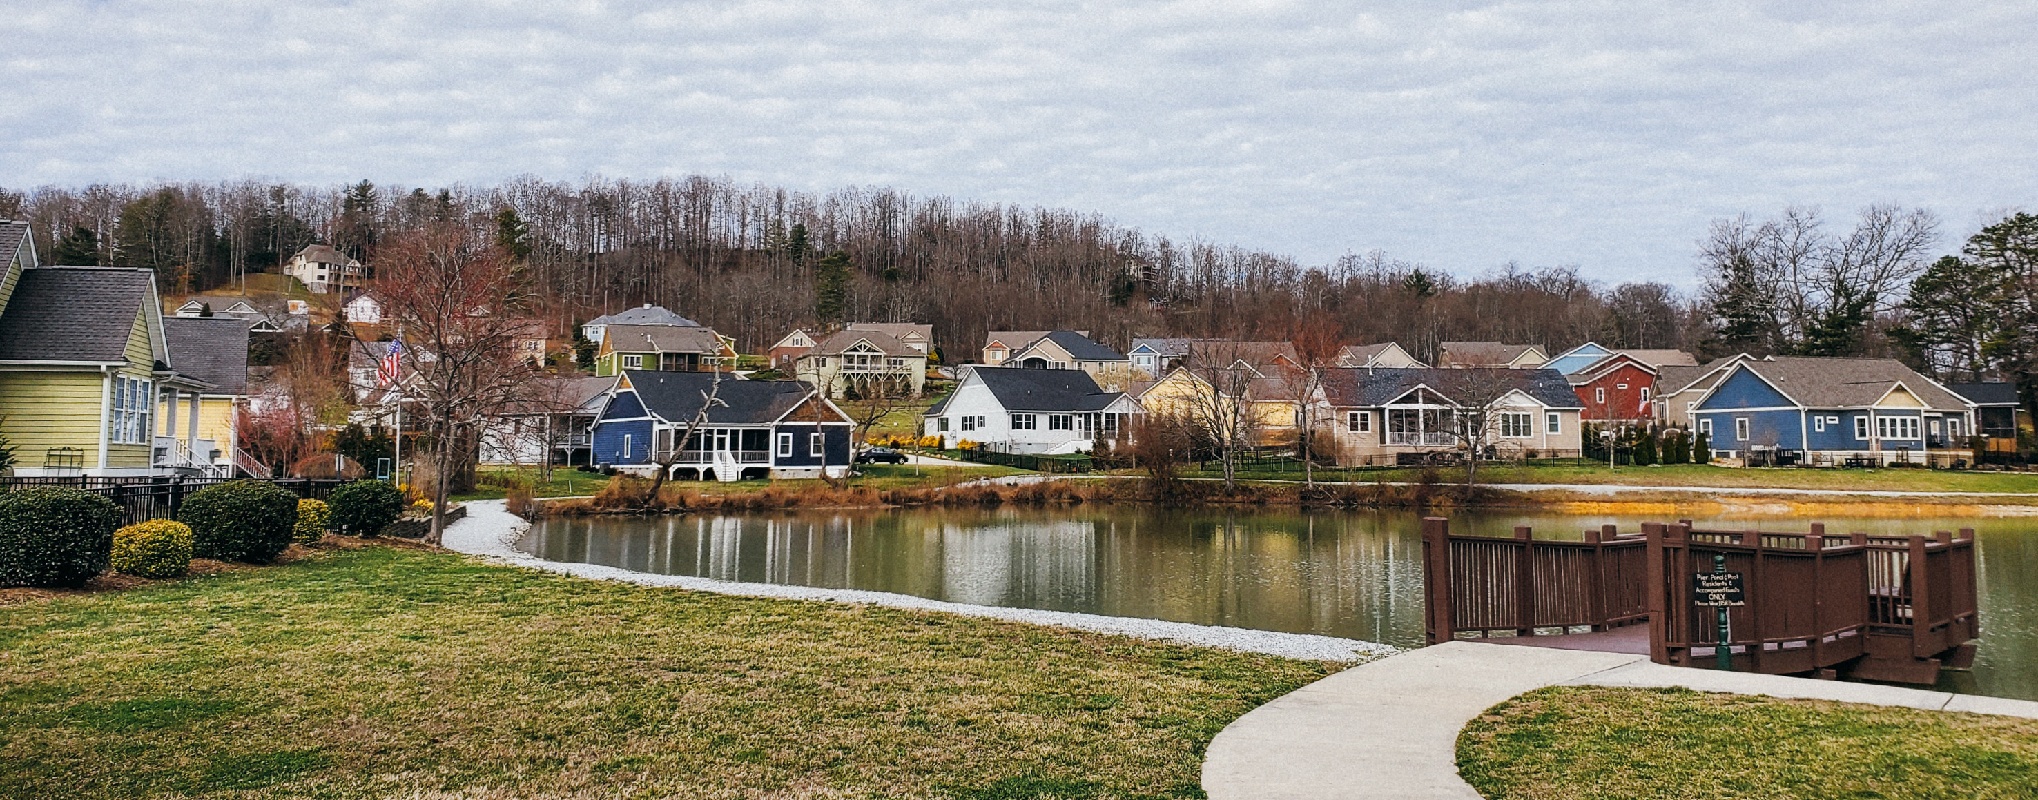 A community of homes in the hills of Western North Carolina. There is a water feature in the surrounding area.